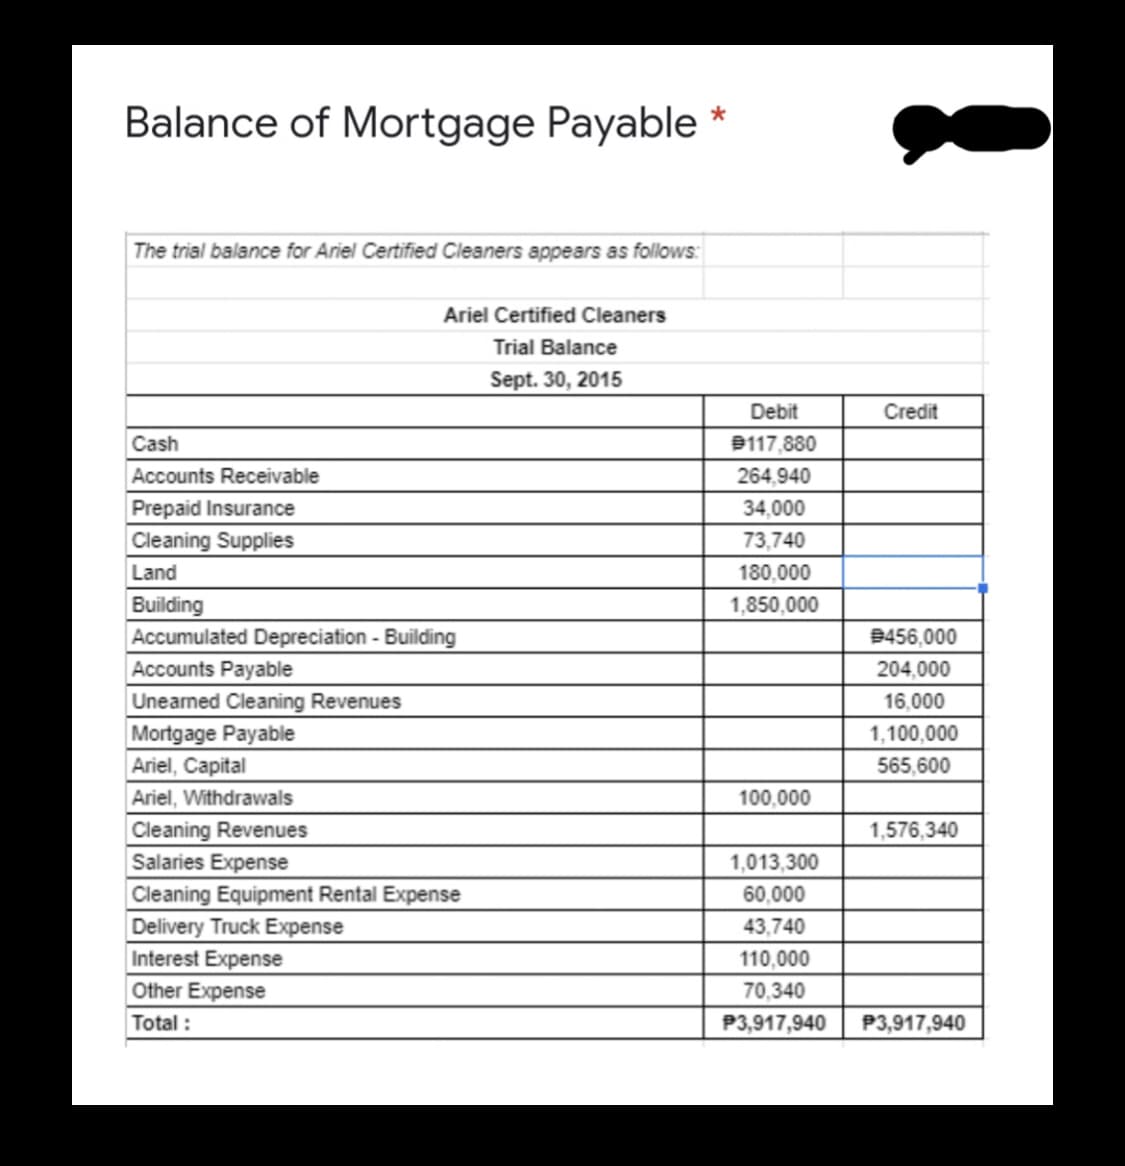 Balance of Mortgage Payable *
The trial balance for Ariel Certified Cleaners appears as follows:
Ariel Certified Cleaners
Trial Balance
Sept. 30, 2015
Debit
Credit
Cash
117,880
Accounts Receivable
264,940
Prepaid Insurance
34,000
Cleaning Supplies
73,740
Land
180,000
Building
1,850,000
Accumulated Depreciation - Building
9456,000
Accounts Payable
204,000
Uneamed Cleaning Revenues
16,000
1,100,000
Mortgage Payable
Ariel, Capital
565,600
Ariel, Withdrawals
100,000
Cleaning Revenues
1,576,340
Salaries Expense
Cleaning Equipment Rental Expense
Delivery Truck Expense
1,013,300
60,000
43,740
Interest Expense
Other Expense
110,000
70,340
Total :
P3,917,940
P3,917,940
